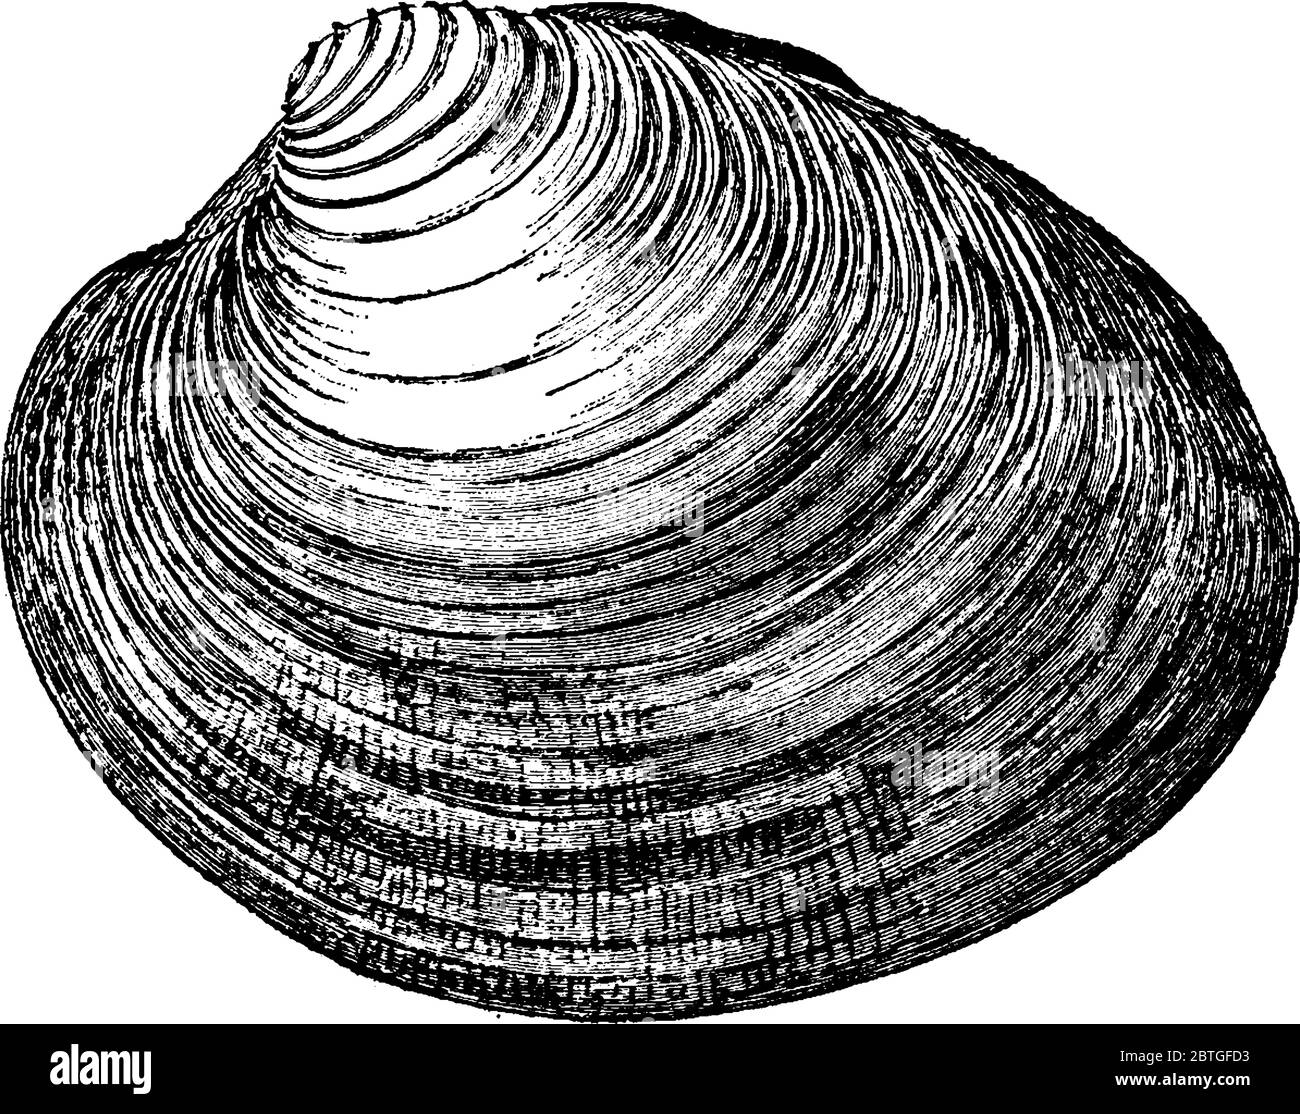 Venus mercenaria, the common quahaug or salt-water clam, about three fourths natural size, vintage line drawing or engraving illustration. Stock Vector